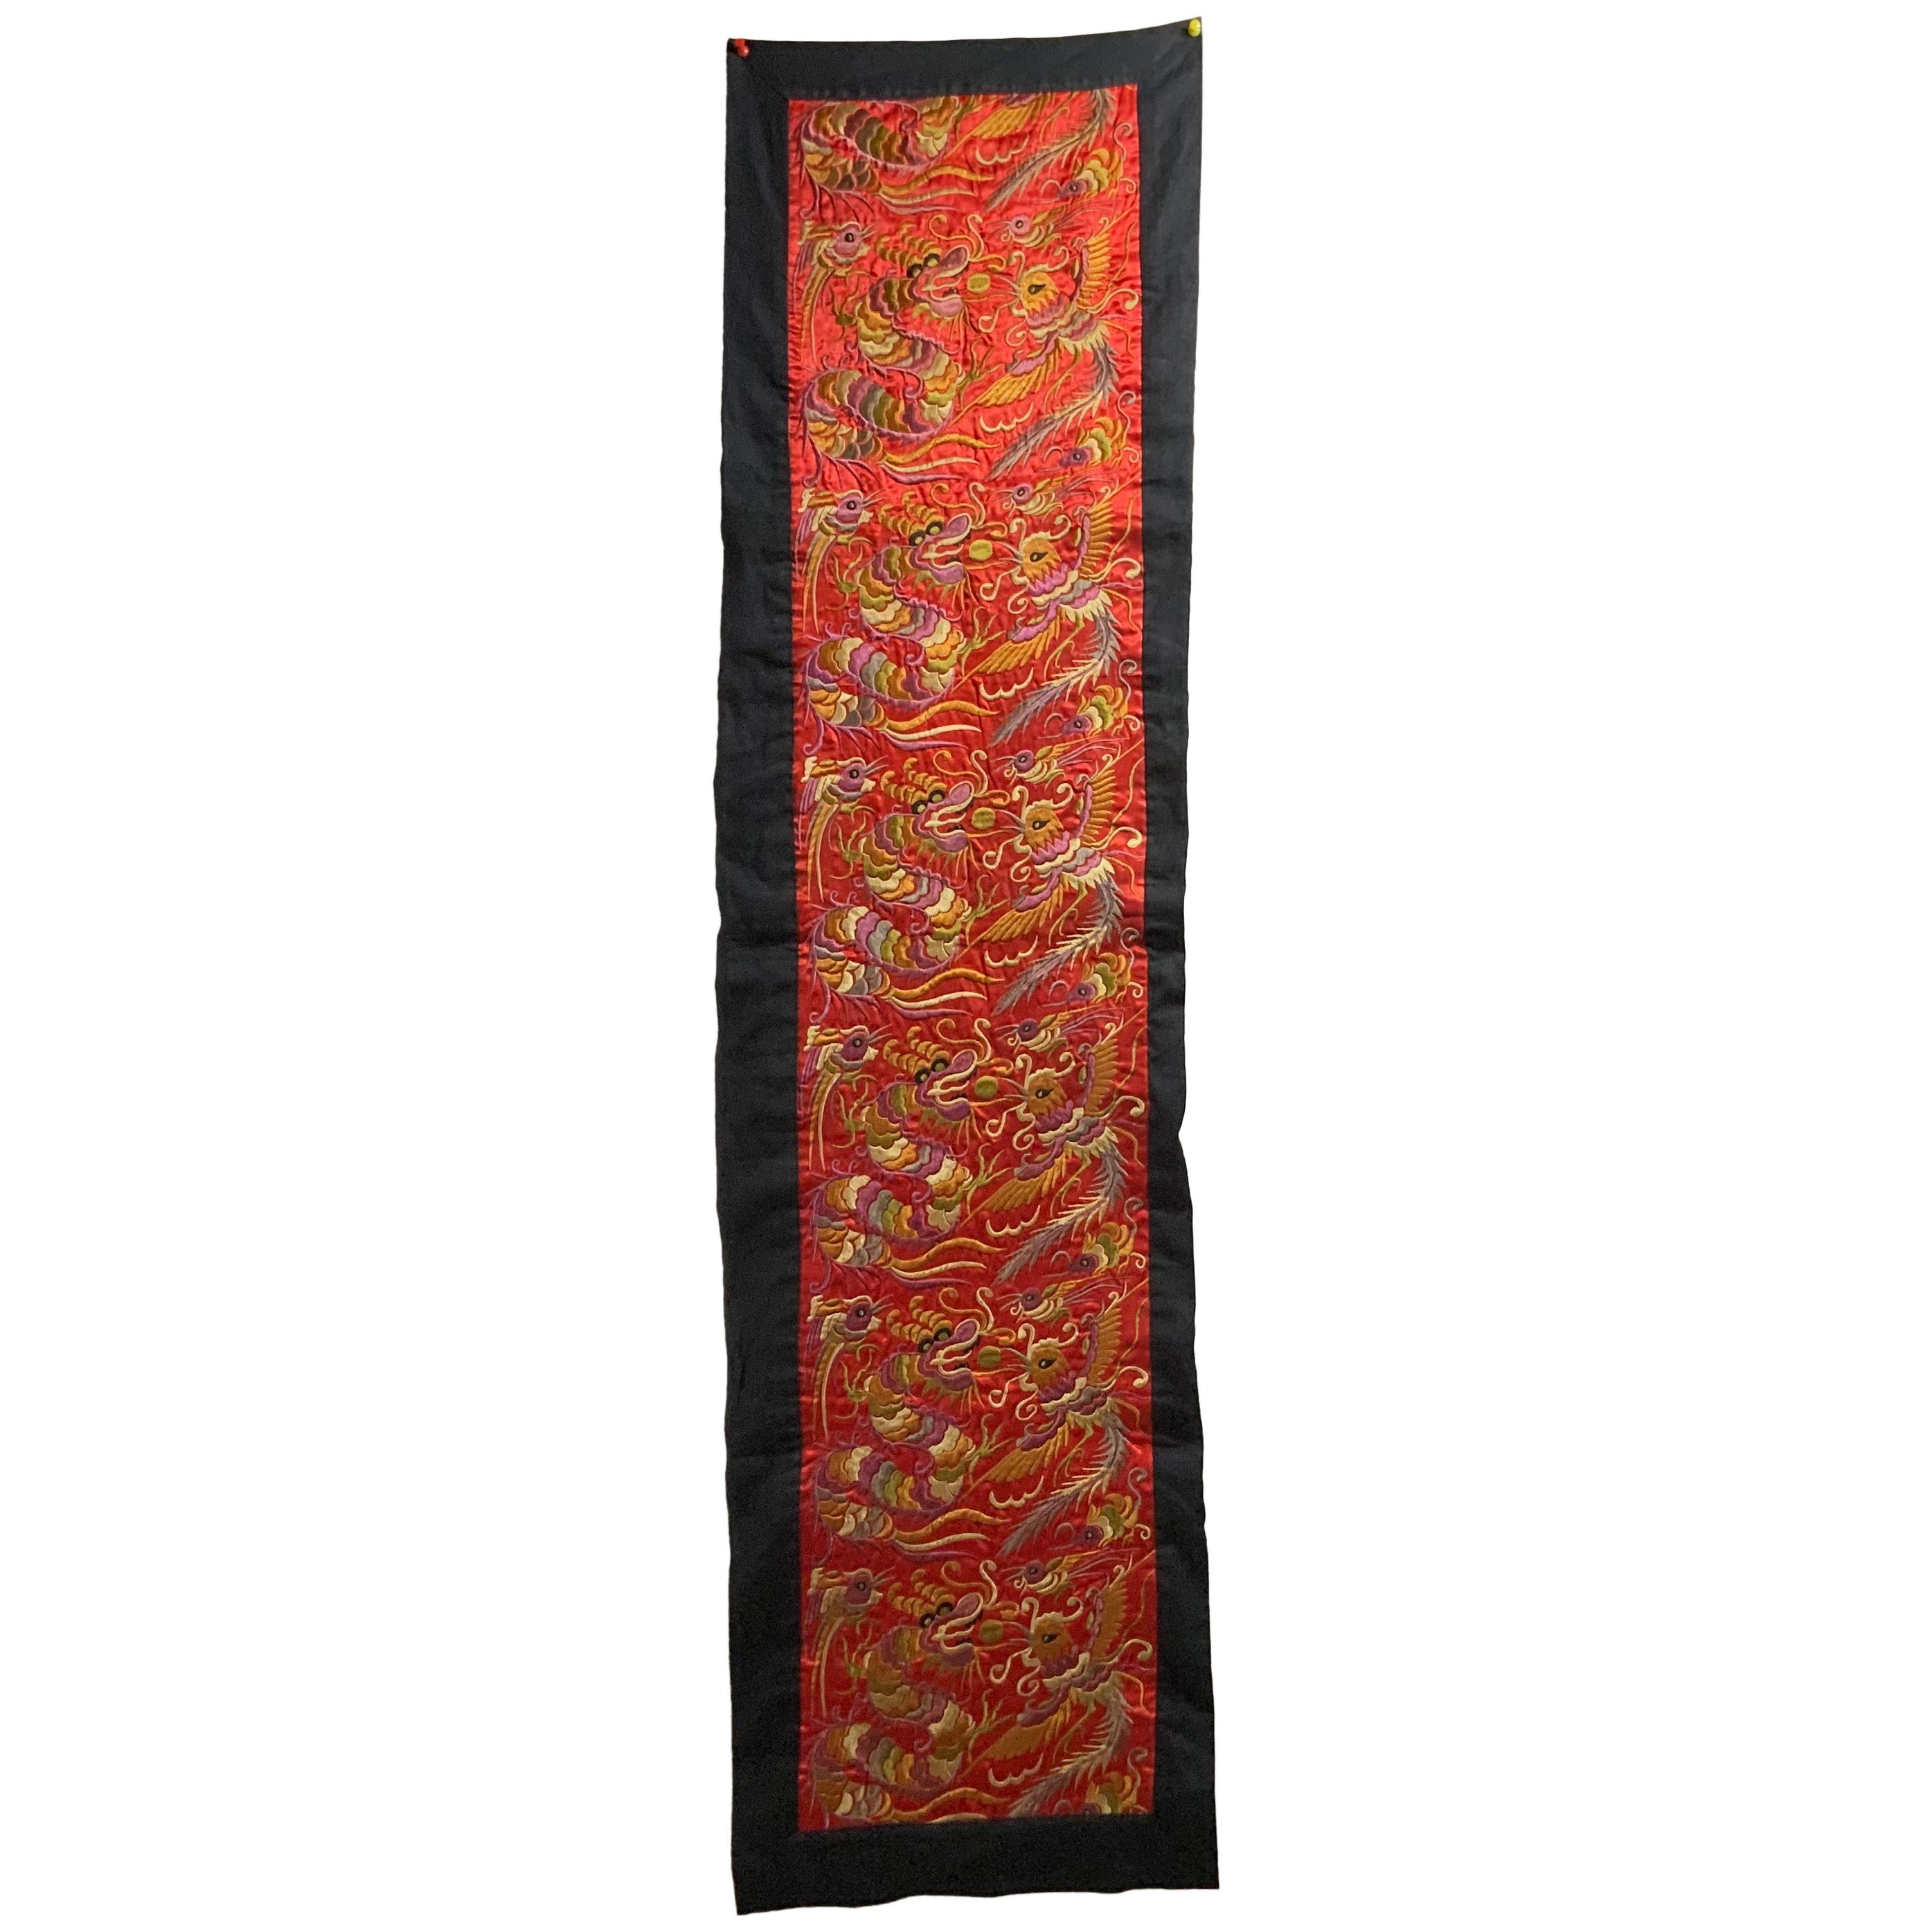 Antique Embroidered Chinese Wall Hanging